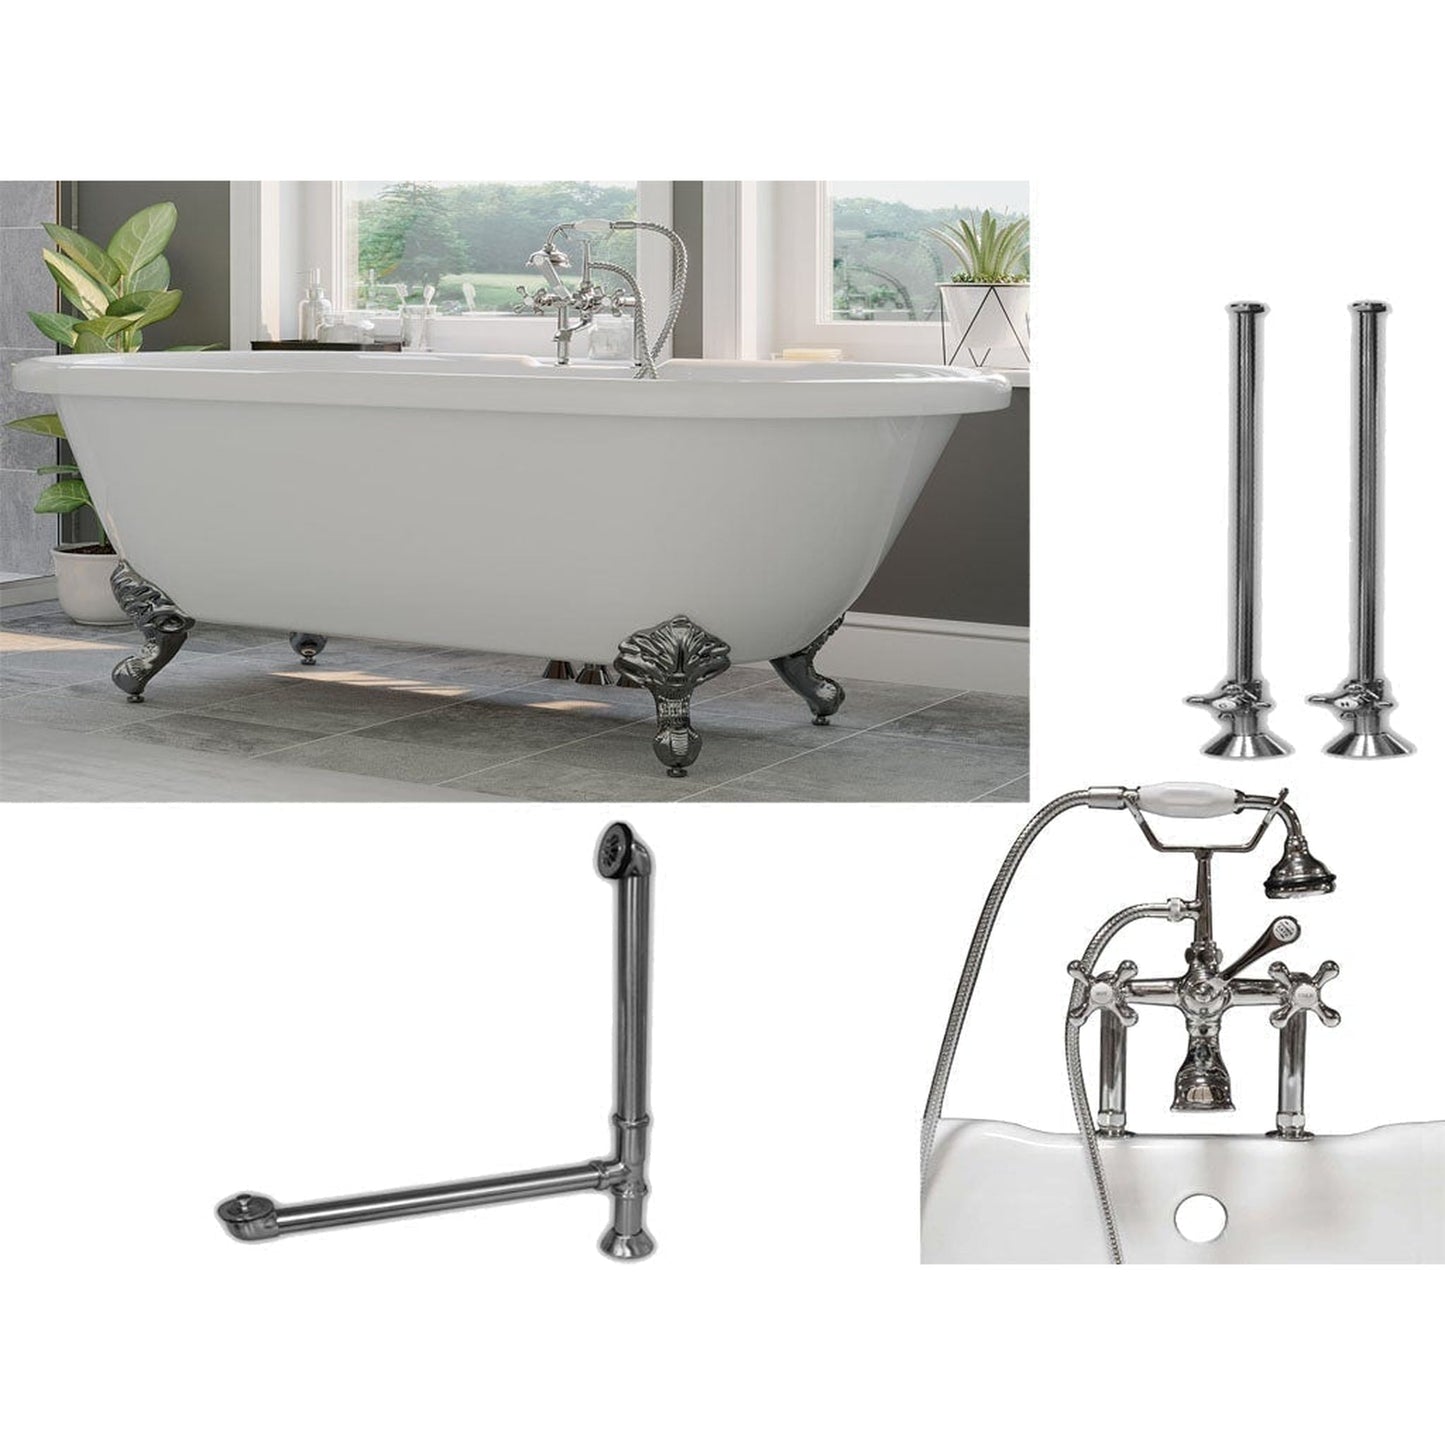 Cambridge Plumbing 60" White Acrylic Double Ended Clawfoot Bathtub With Deck Holes And Complete Plumbing Package Including 6” Riser Deck Mount Faucet, Supply Lines, Drain And Overflow Assembly In Polished Chrome